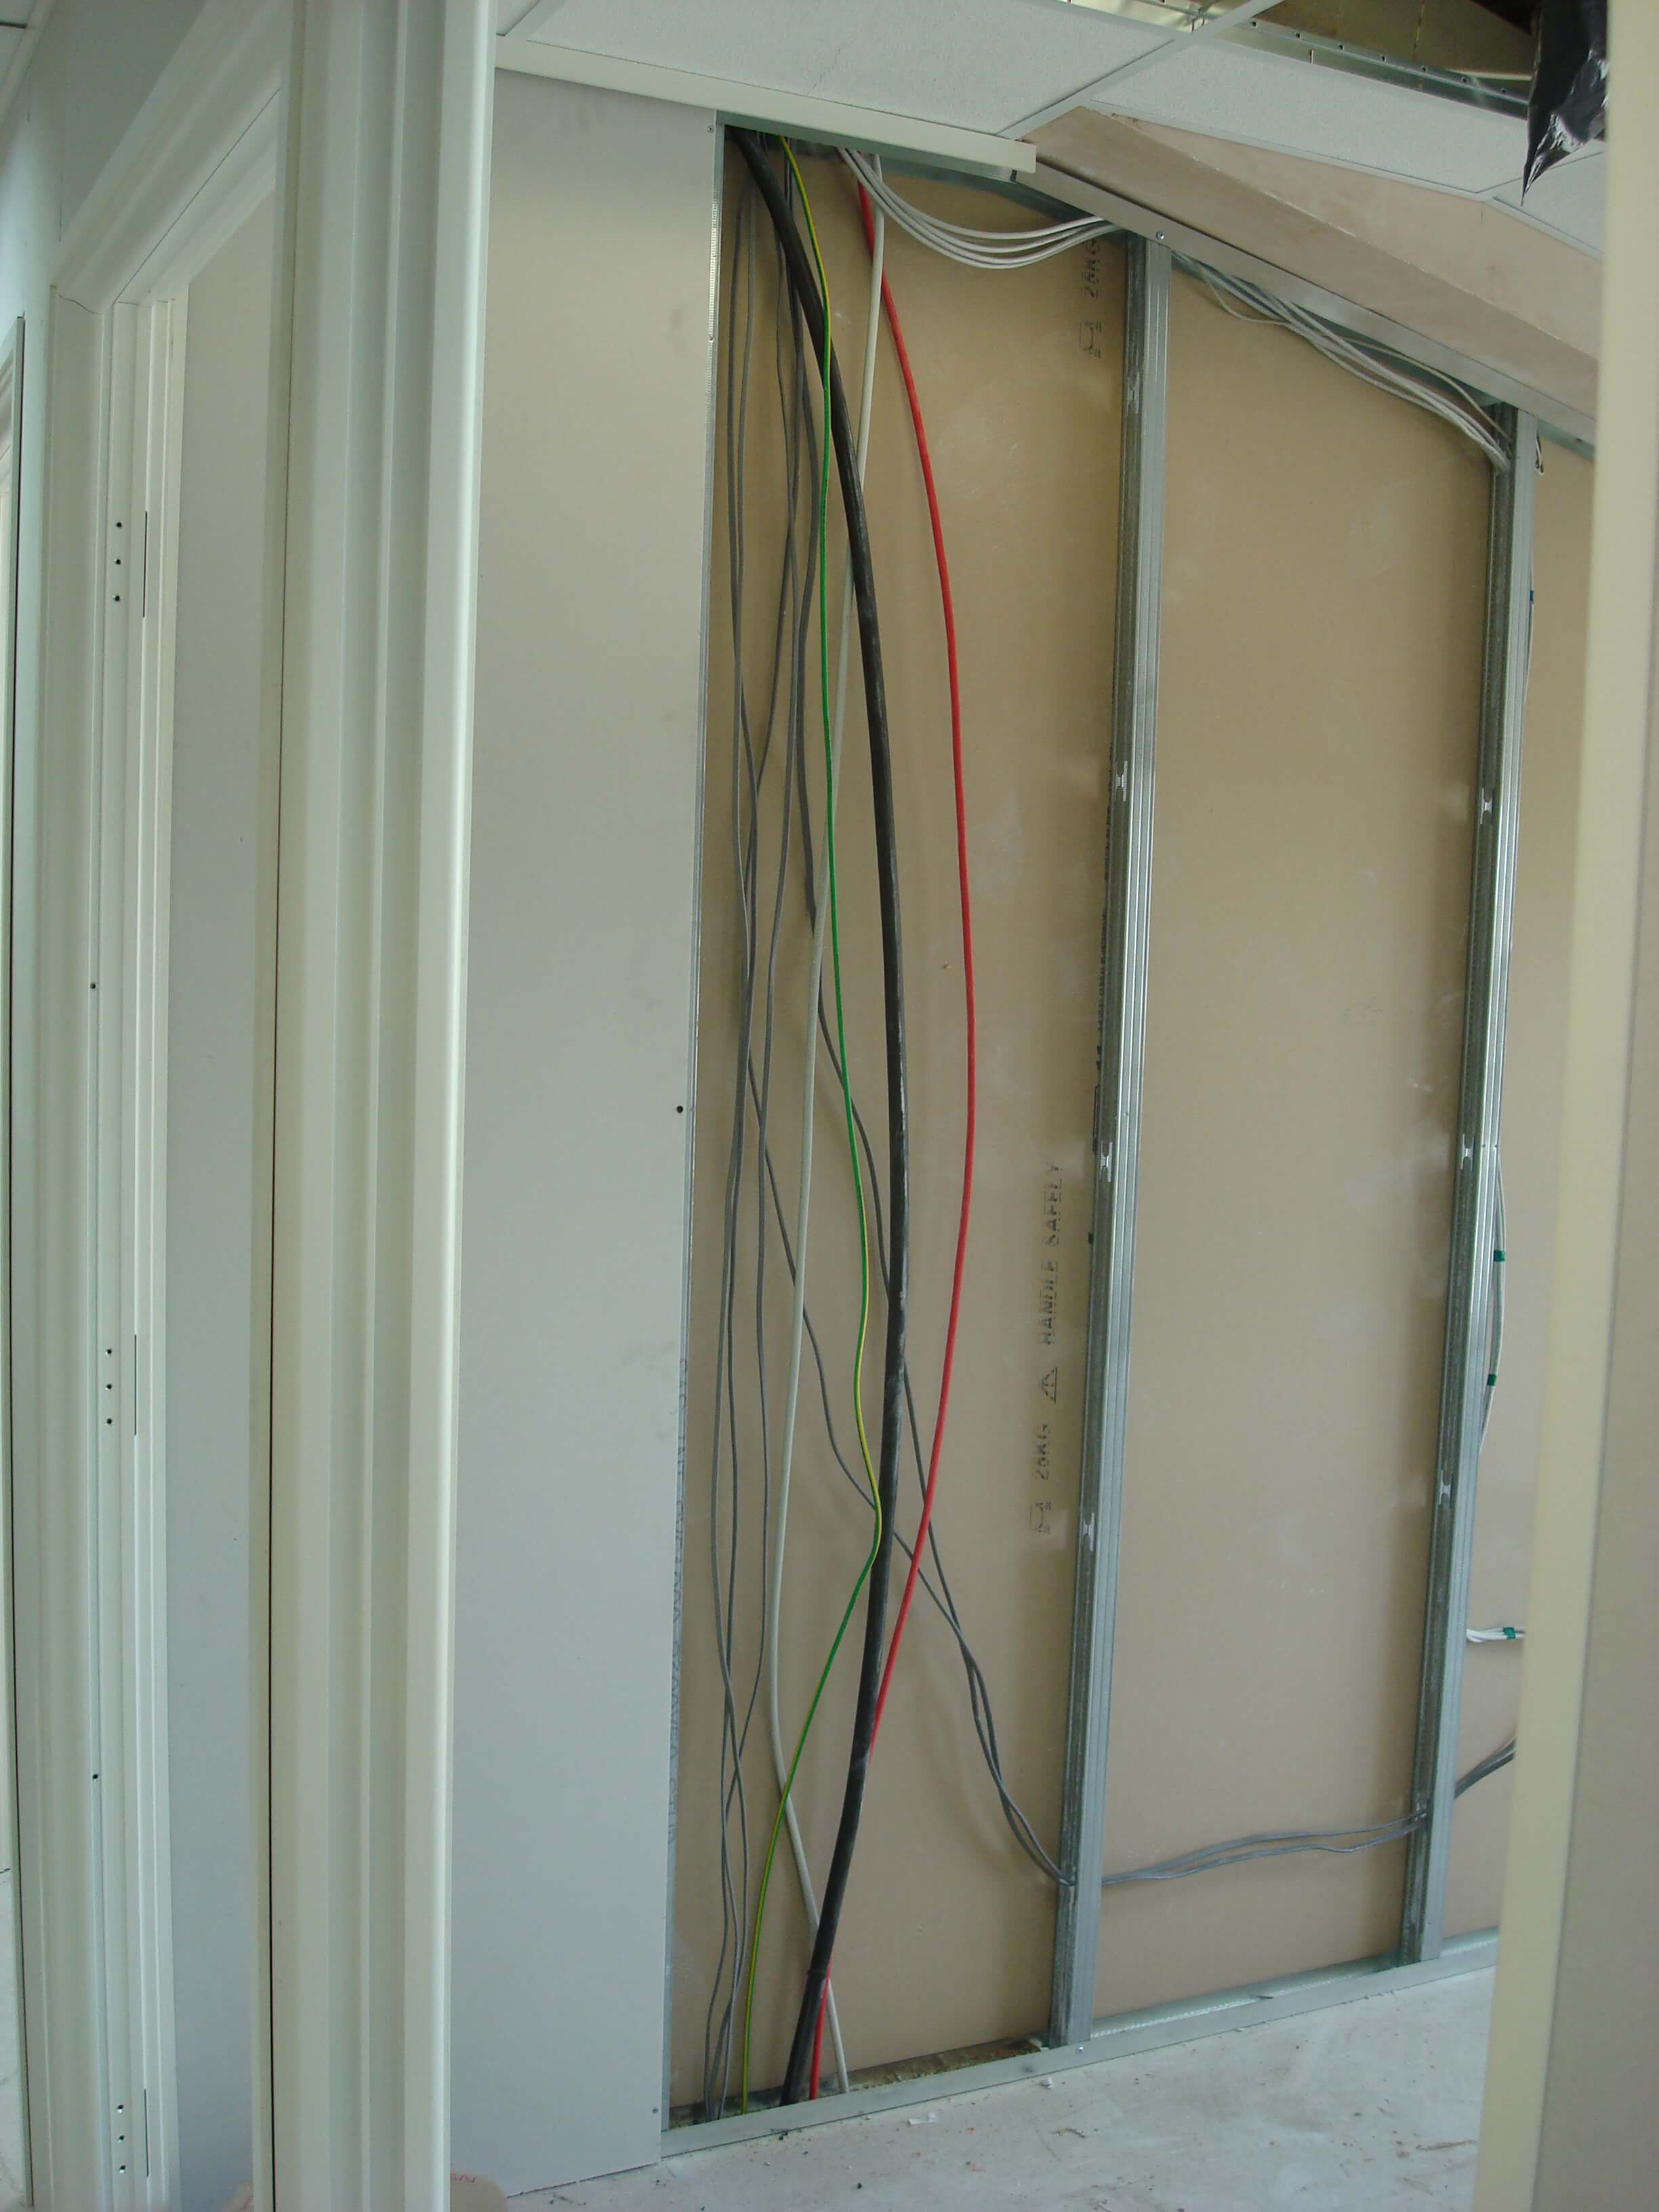 Cabling inside partition walls